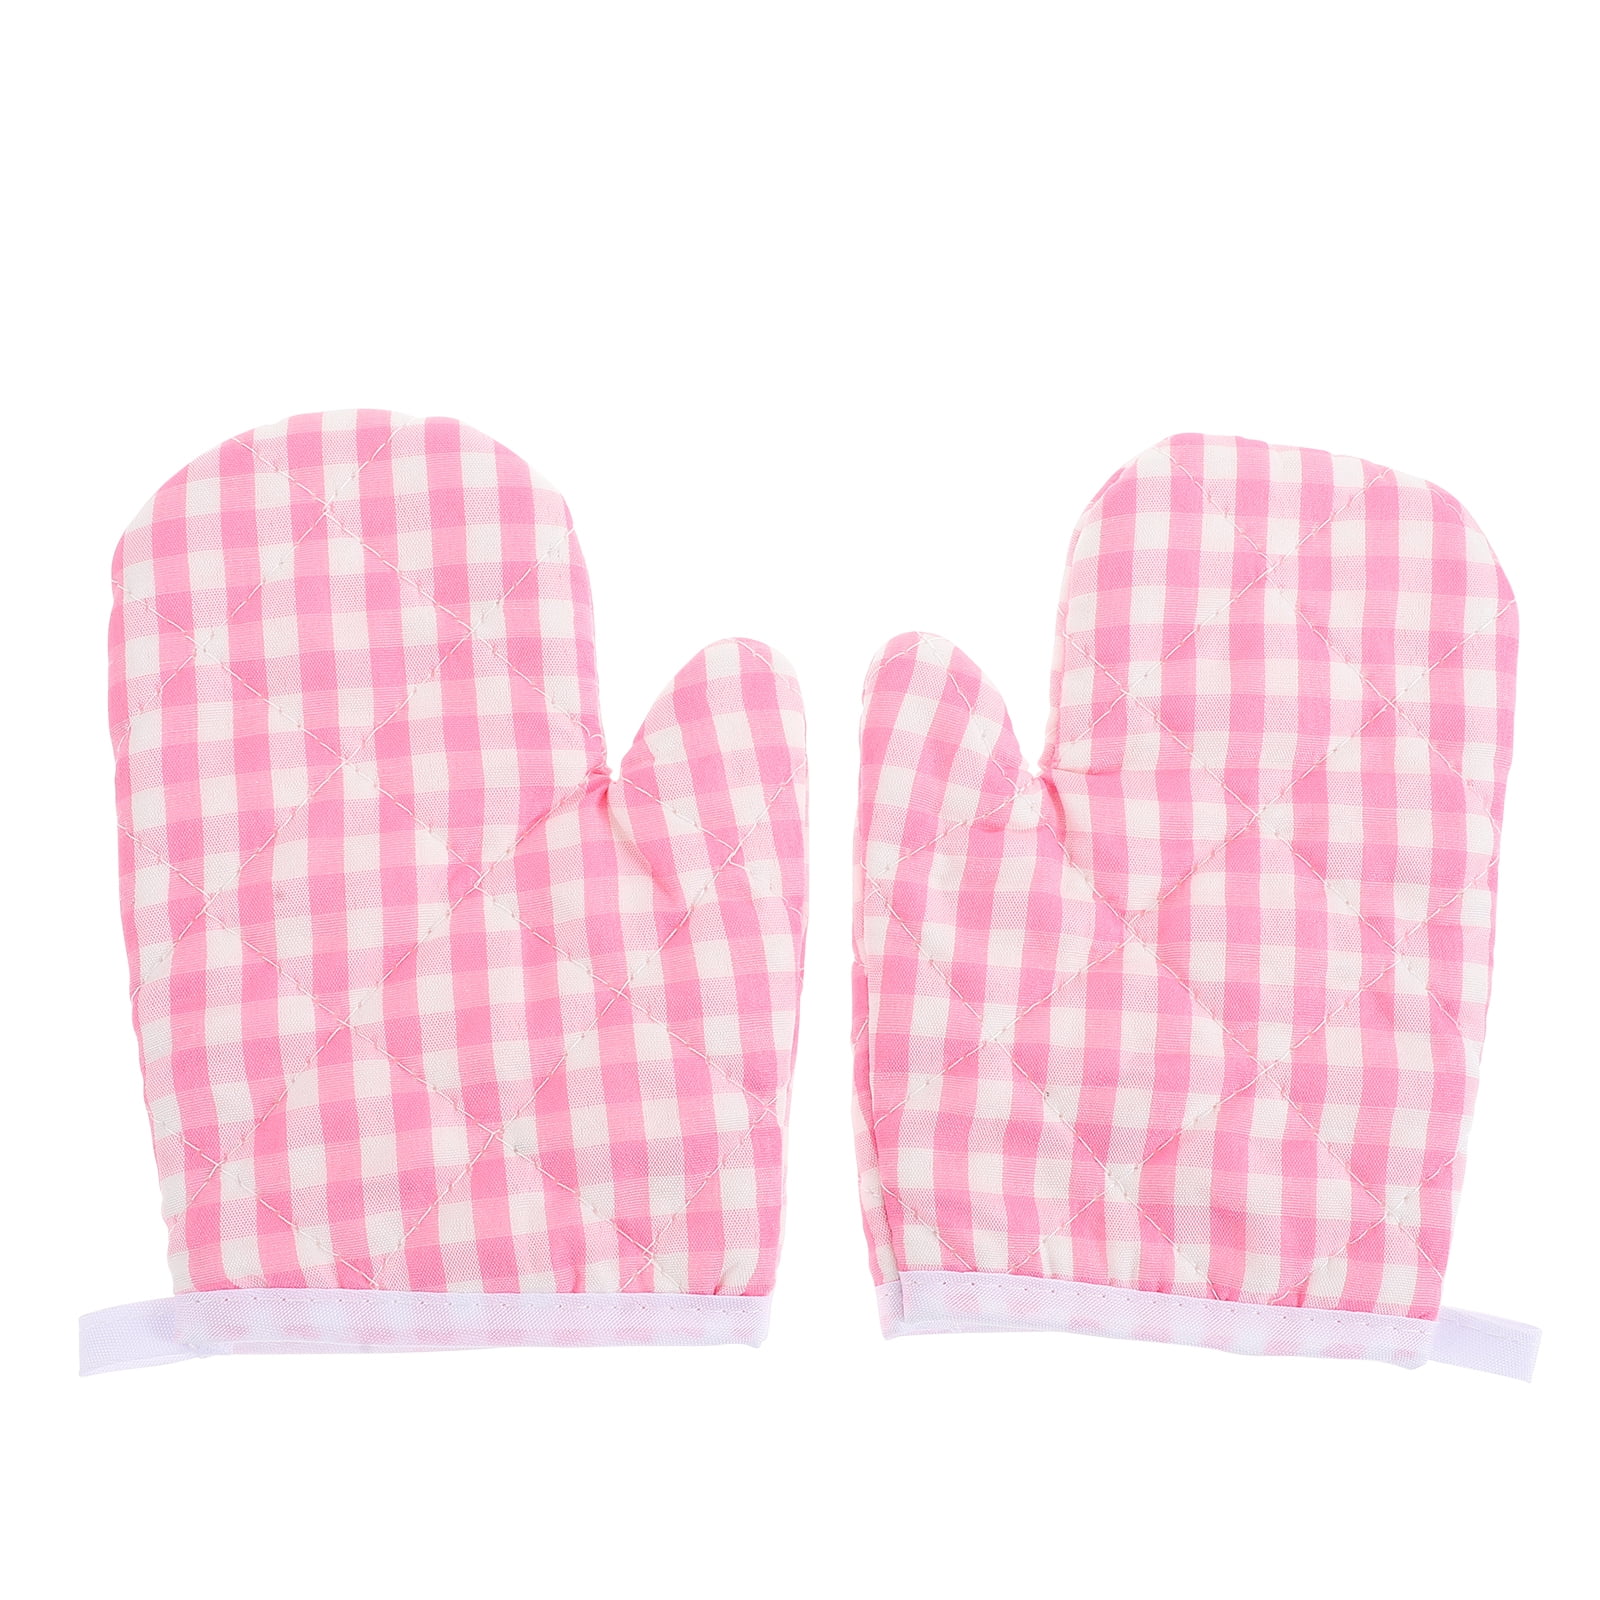 DOERDO 2 Pack Kid Oven Mitts for Children Heat Resistant Kitchen Mitts,  Great for Cooking Baking, Age 4-12 (7x4.7, Sweet Heart)